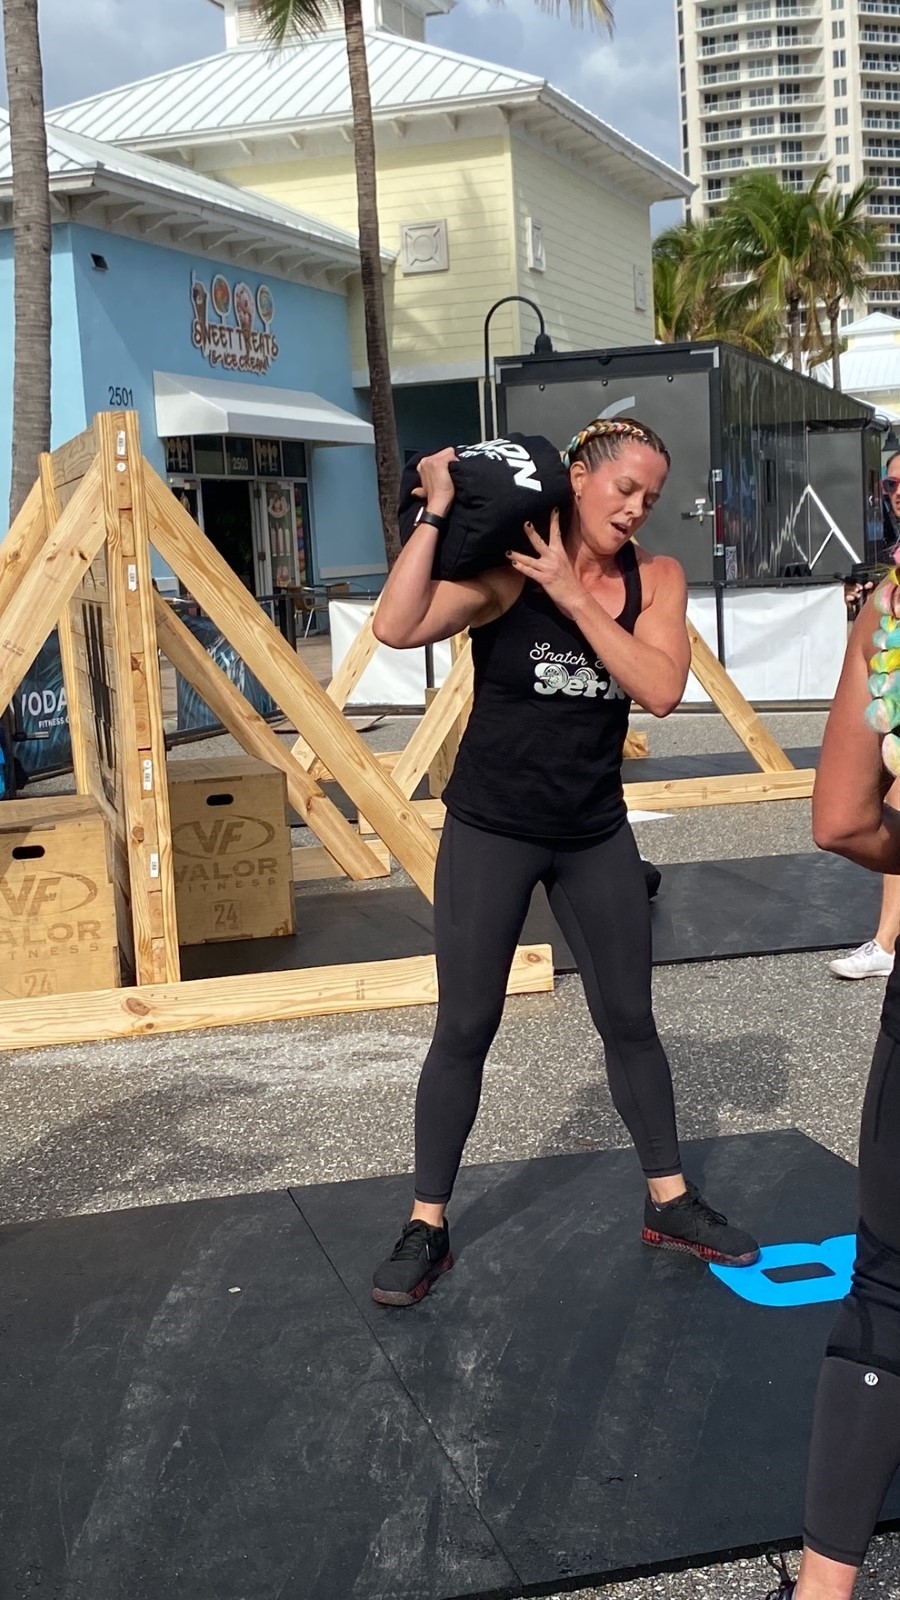 Allison at CrossFit competition